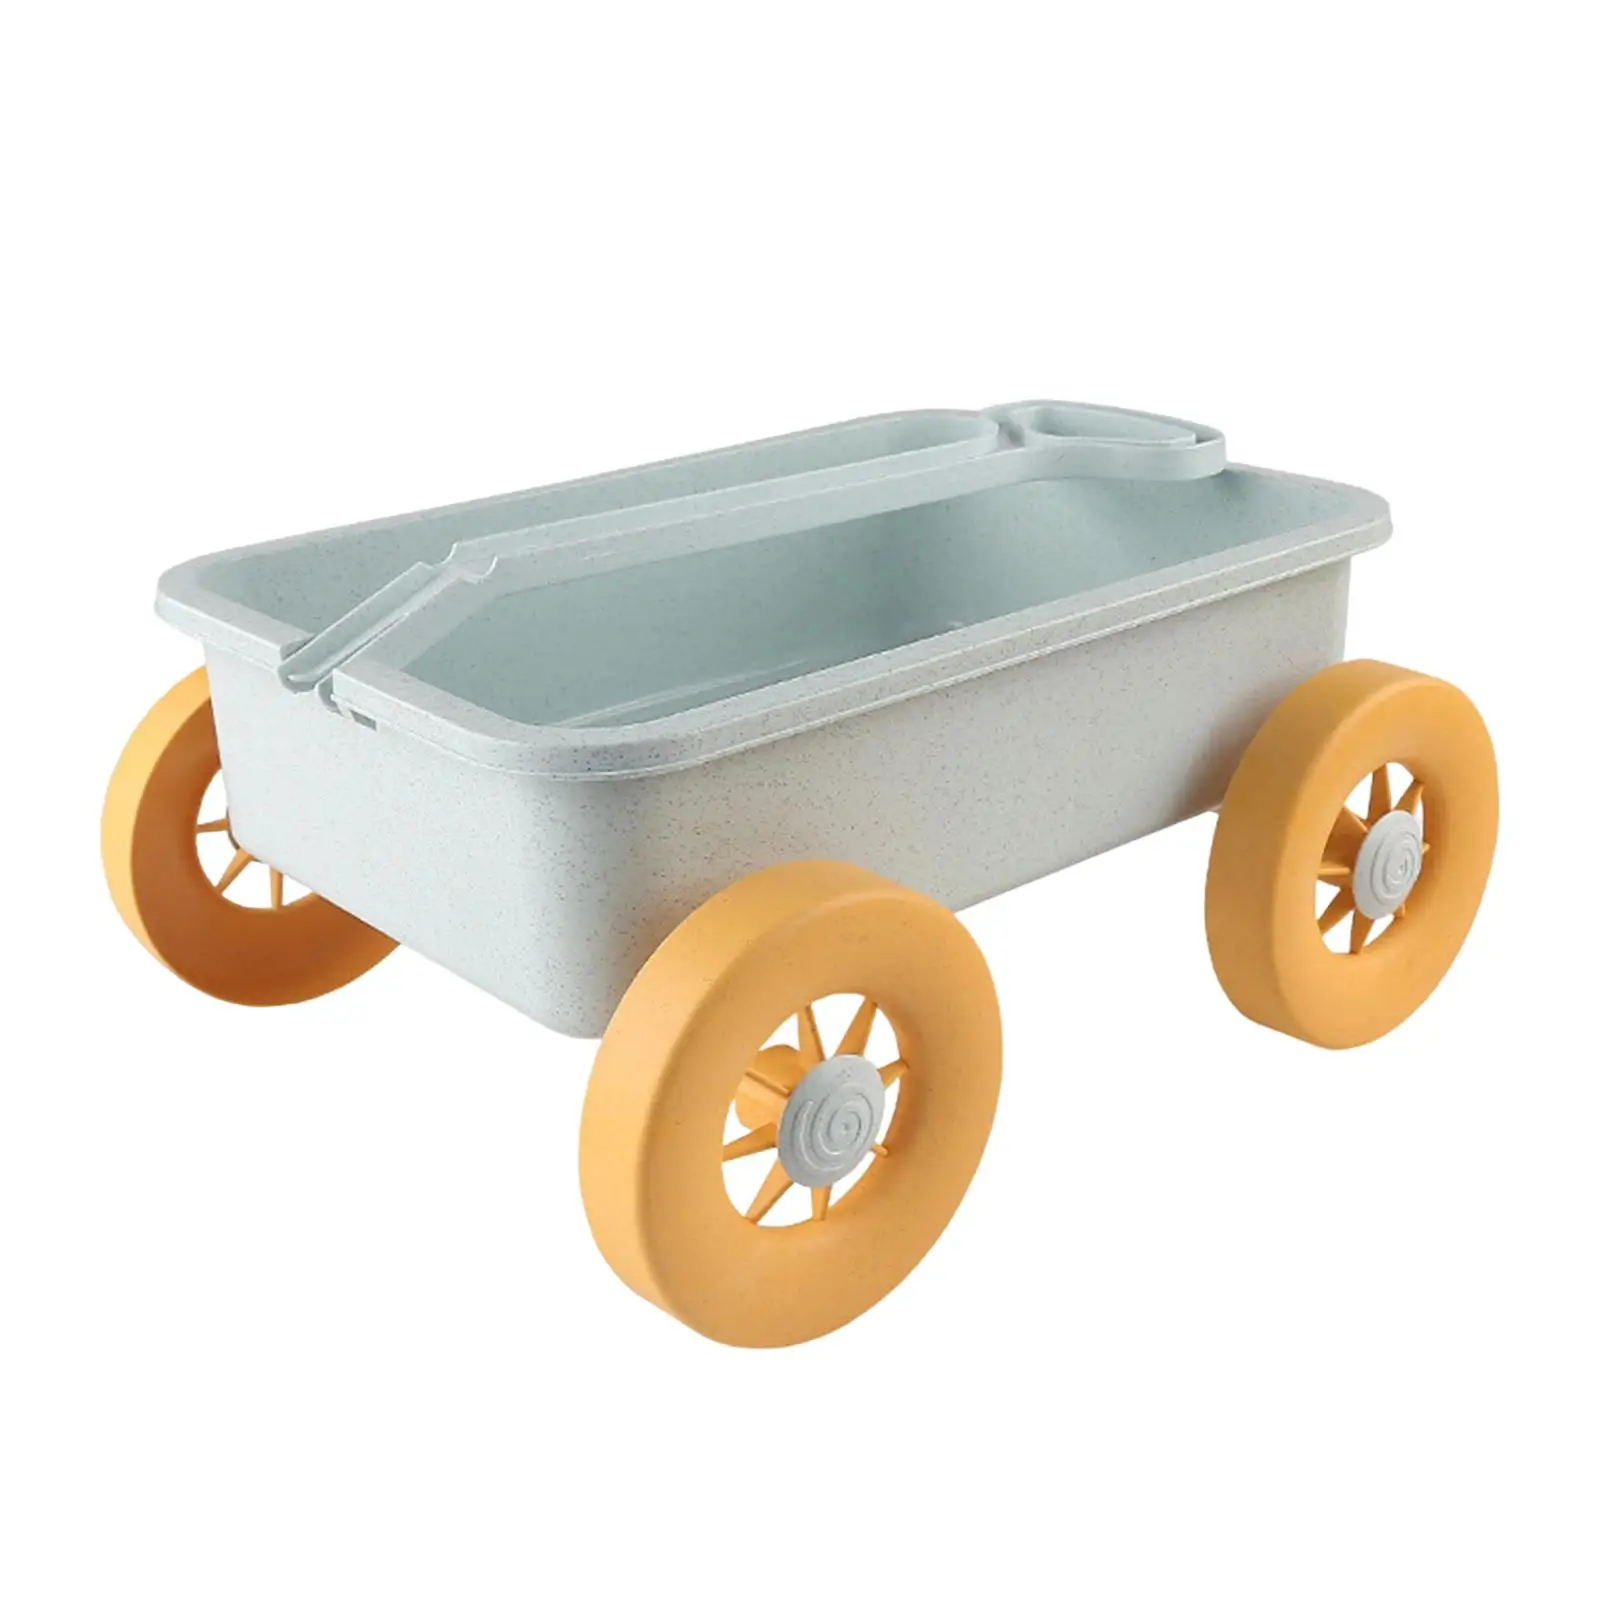 Play Wagon Beach Toys Vehicle Garden Wagon Tools Toy Small Wagon Toys for Stuffed Animals Holding Small Toys